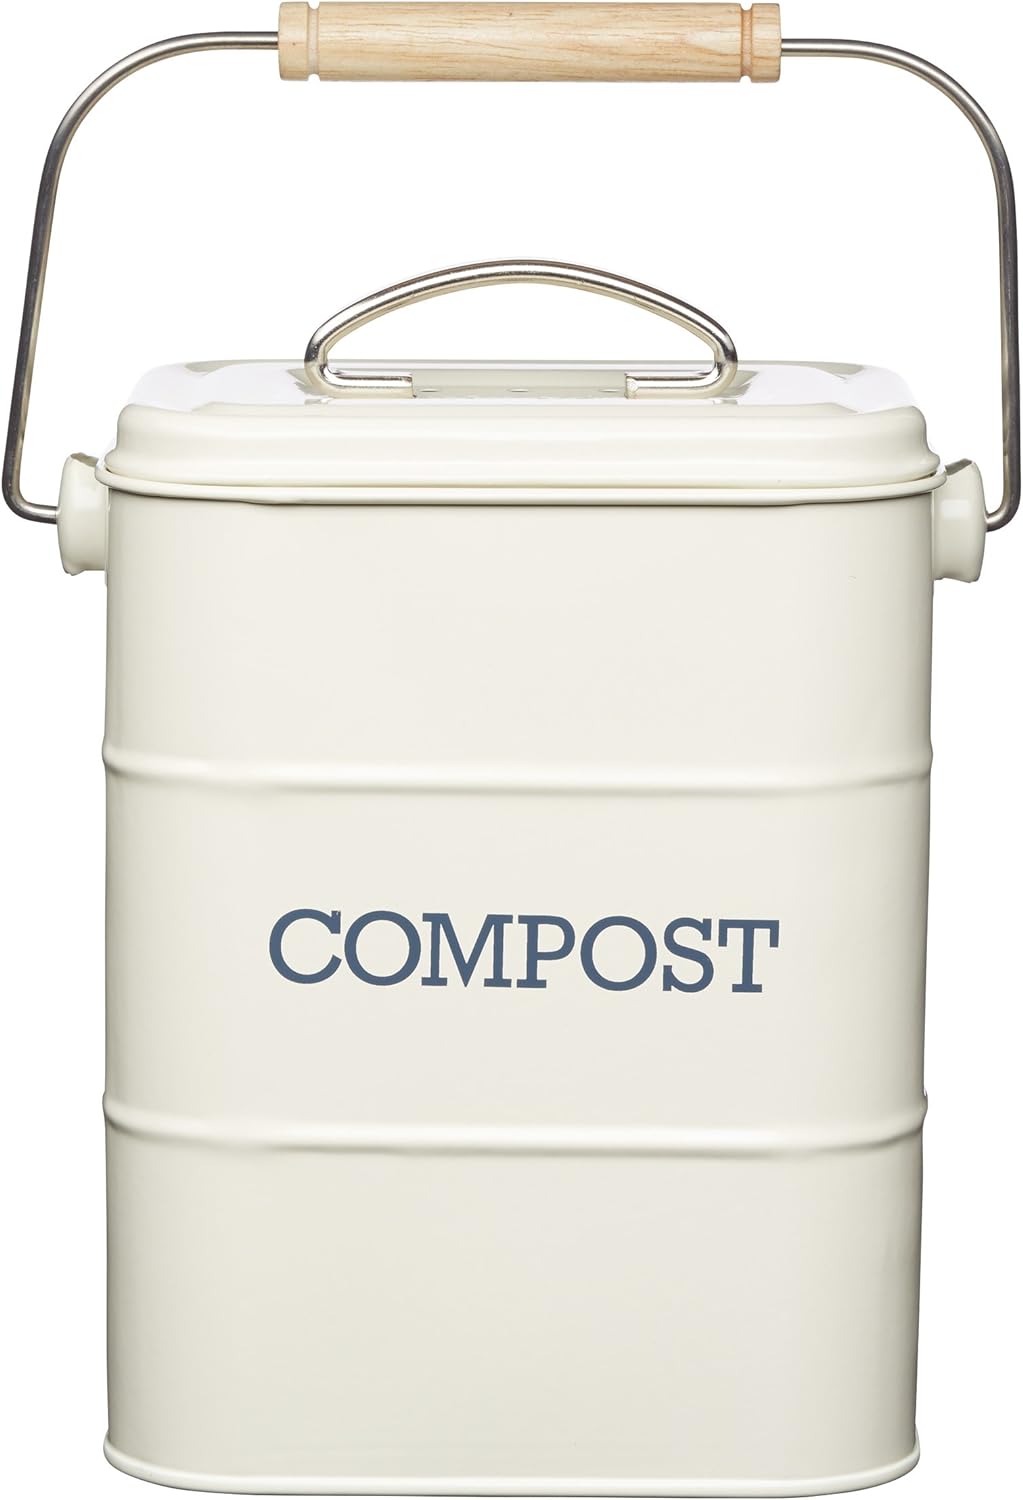 Xbopetda Stainless Steel Compost Bin for Kitchen Countertop,1 Gallon Compost Pail Black includes Charcoal Filter,with Lid and handle,Composter for Zero Waste Recycling Kitchen Compost Bin